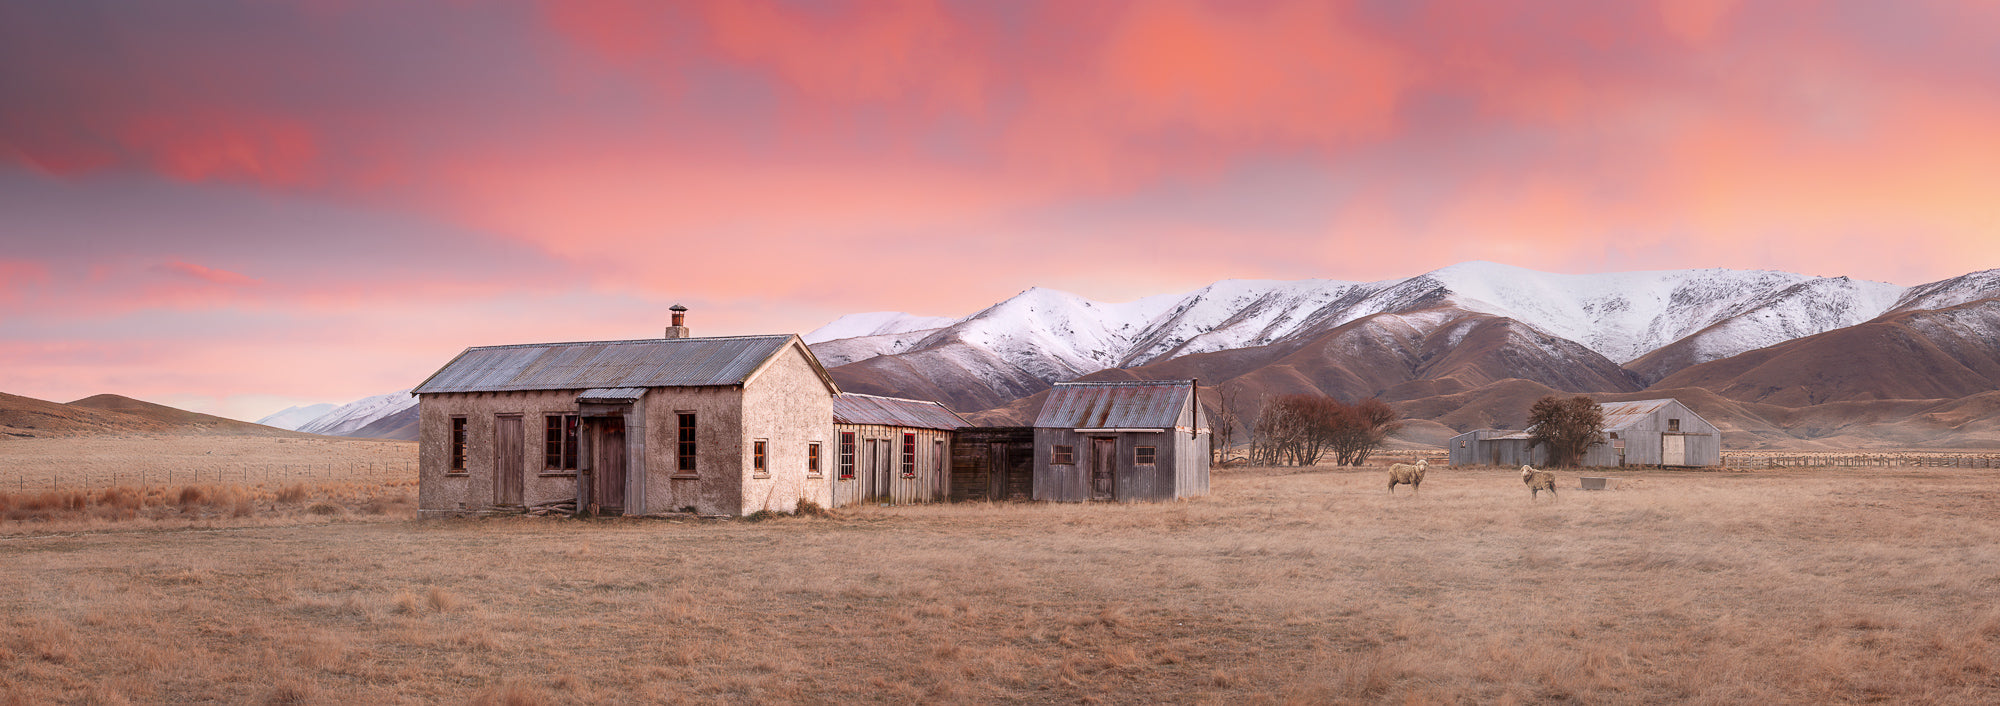 Capturing Aotearoa: The Timeless Beauty of New Zealand Landscapes - Stephen Milner